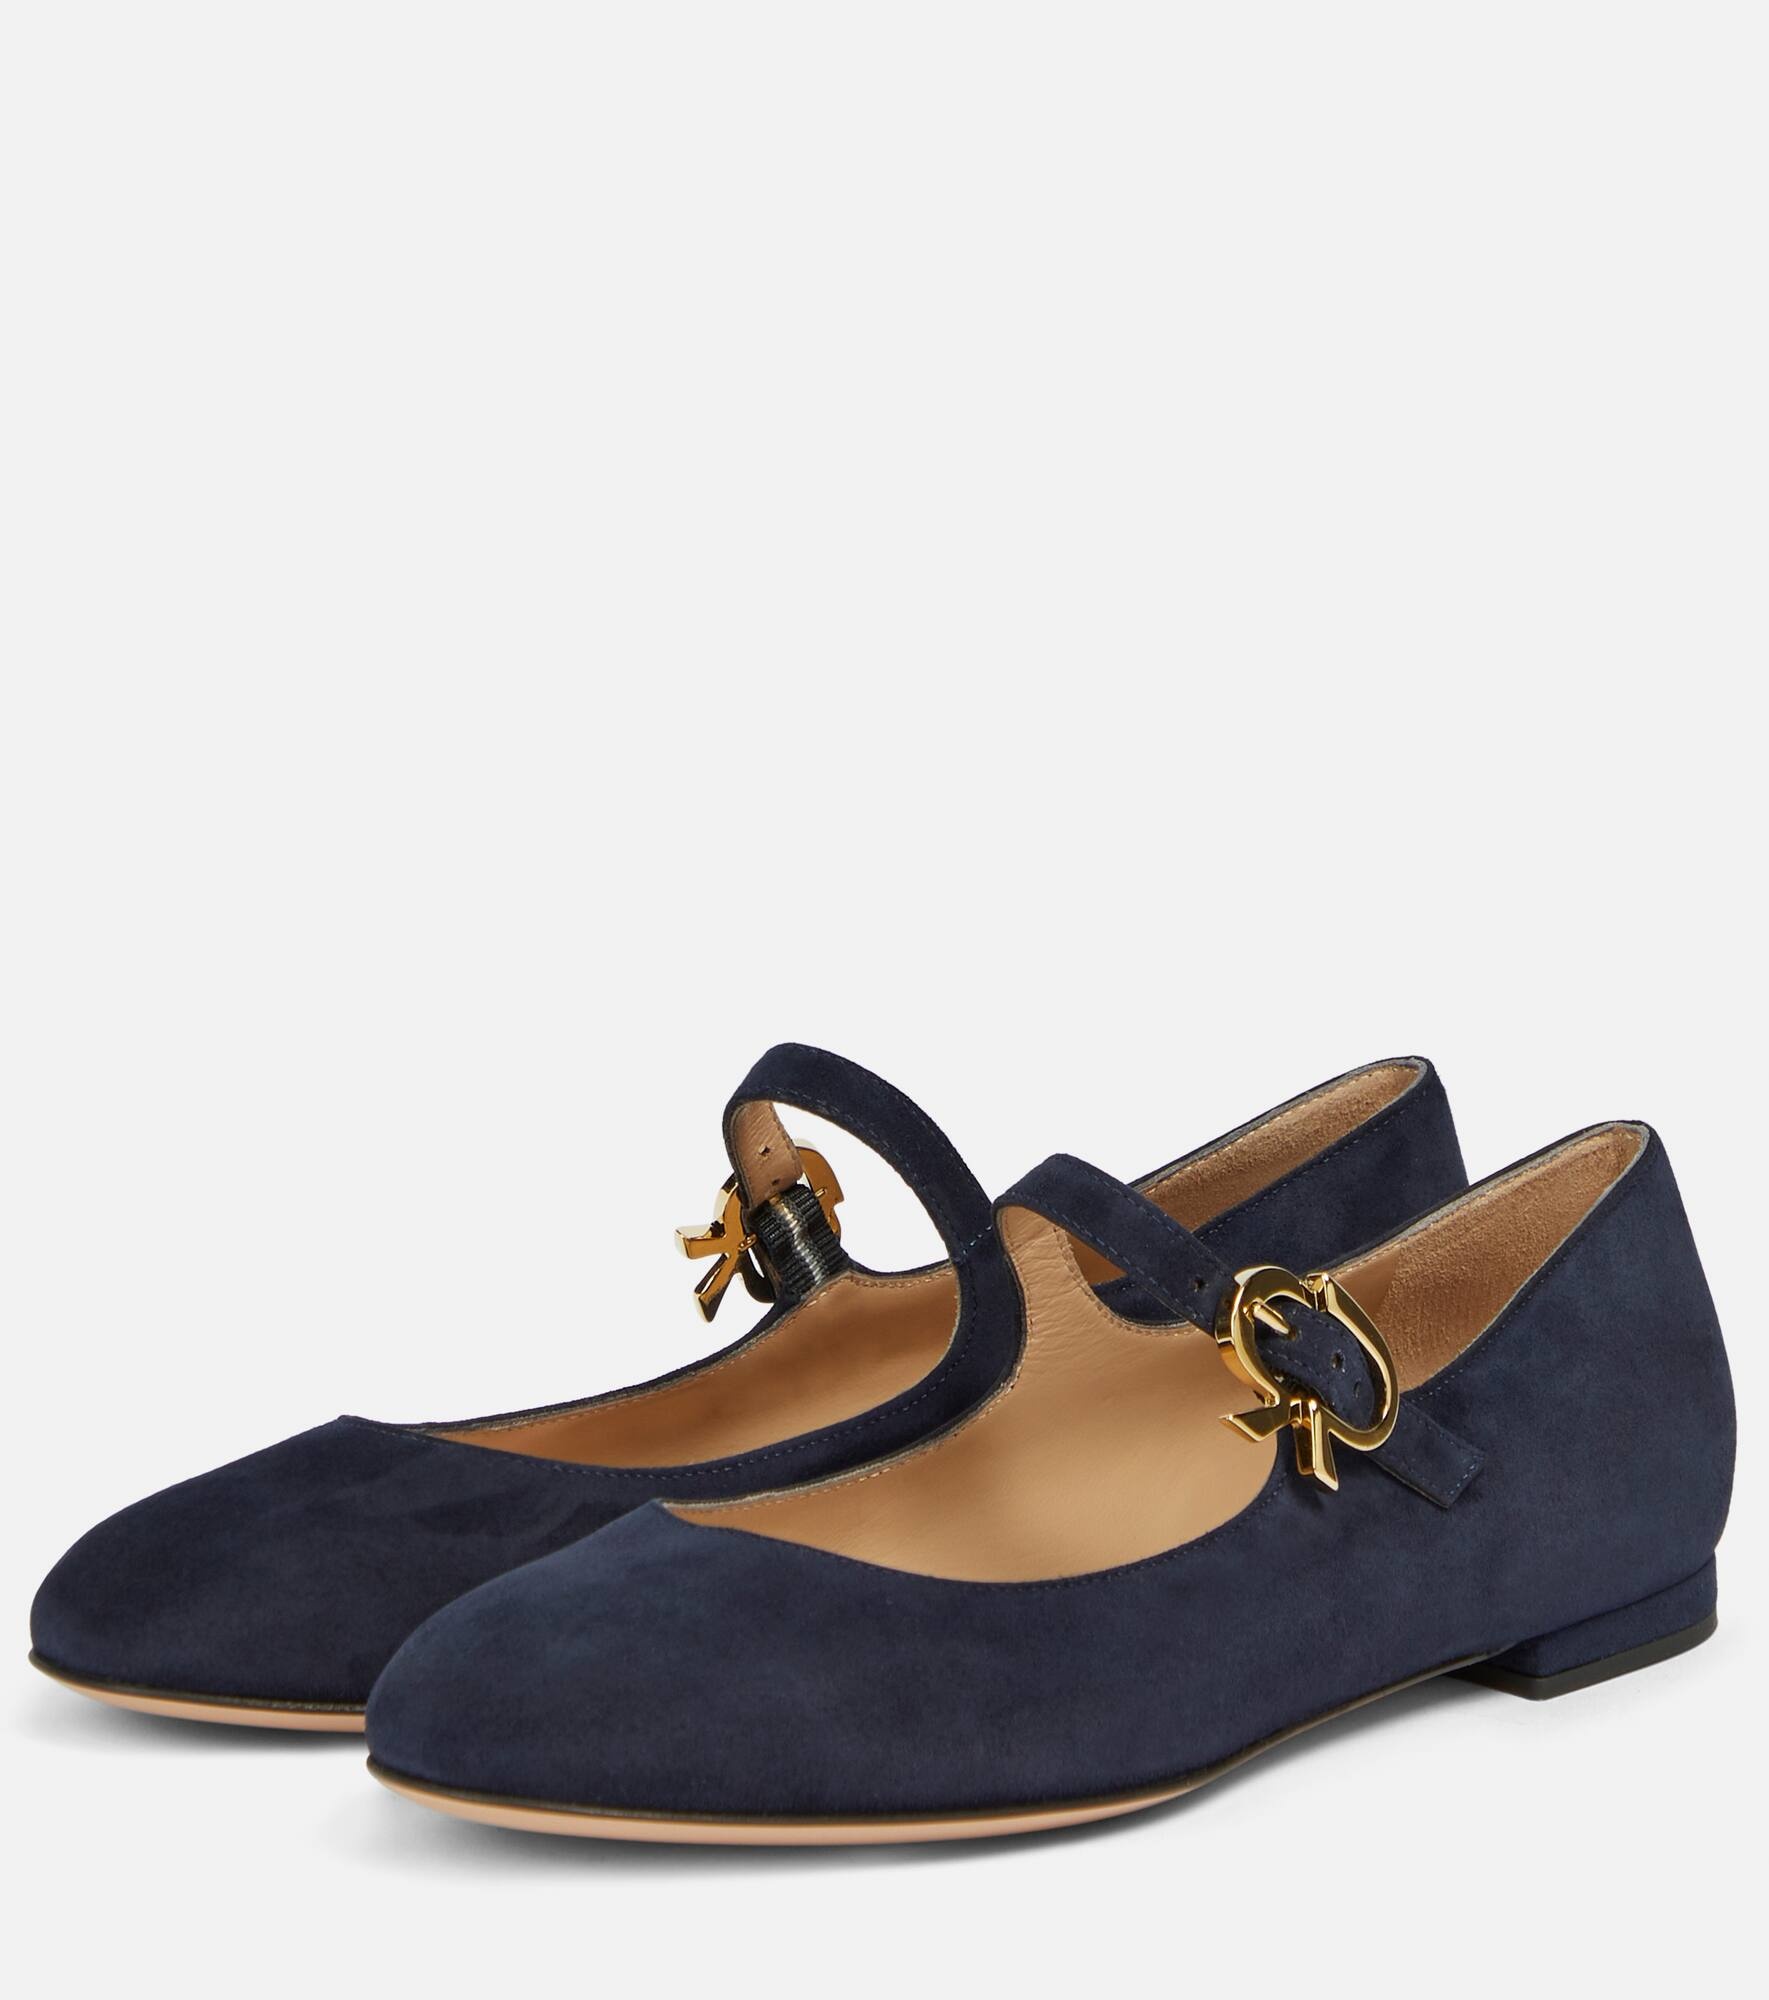 Mary Ribbon suede ballet flats - 5